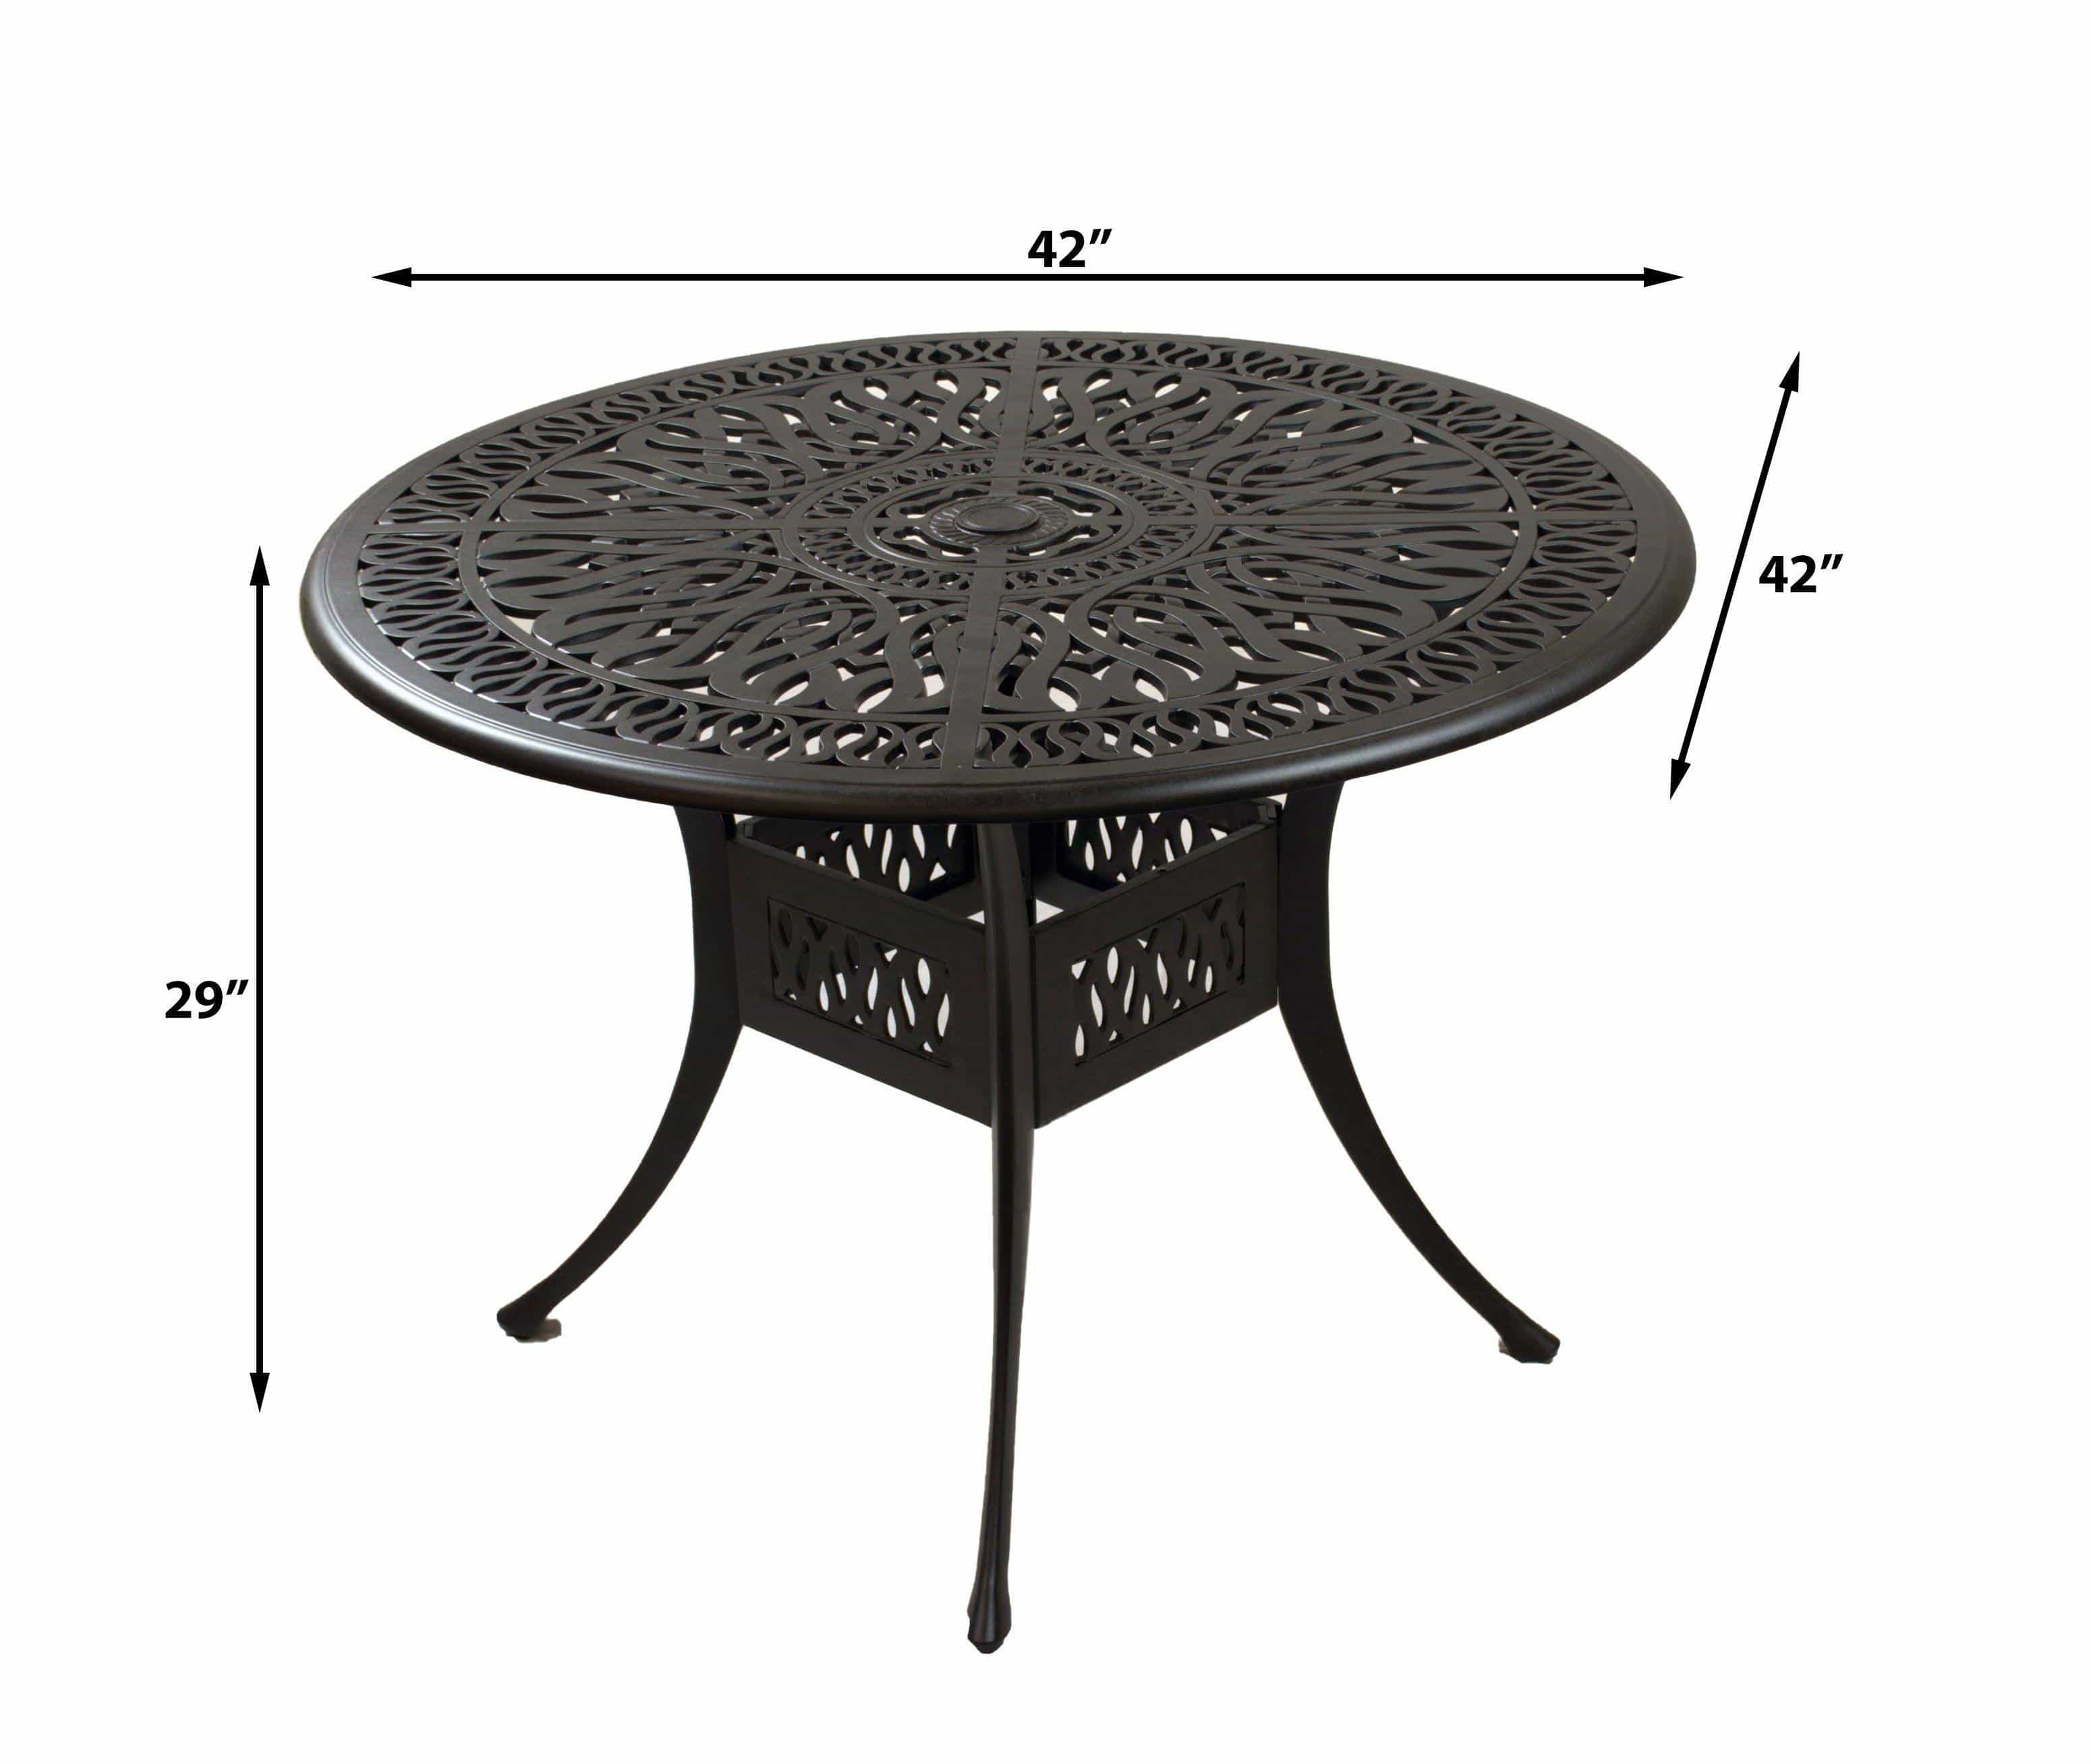 Lawton Casual Comfort Outdoor Dining Table Lawton Casual Comfort - 42" Round Dining Table Signature